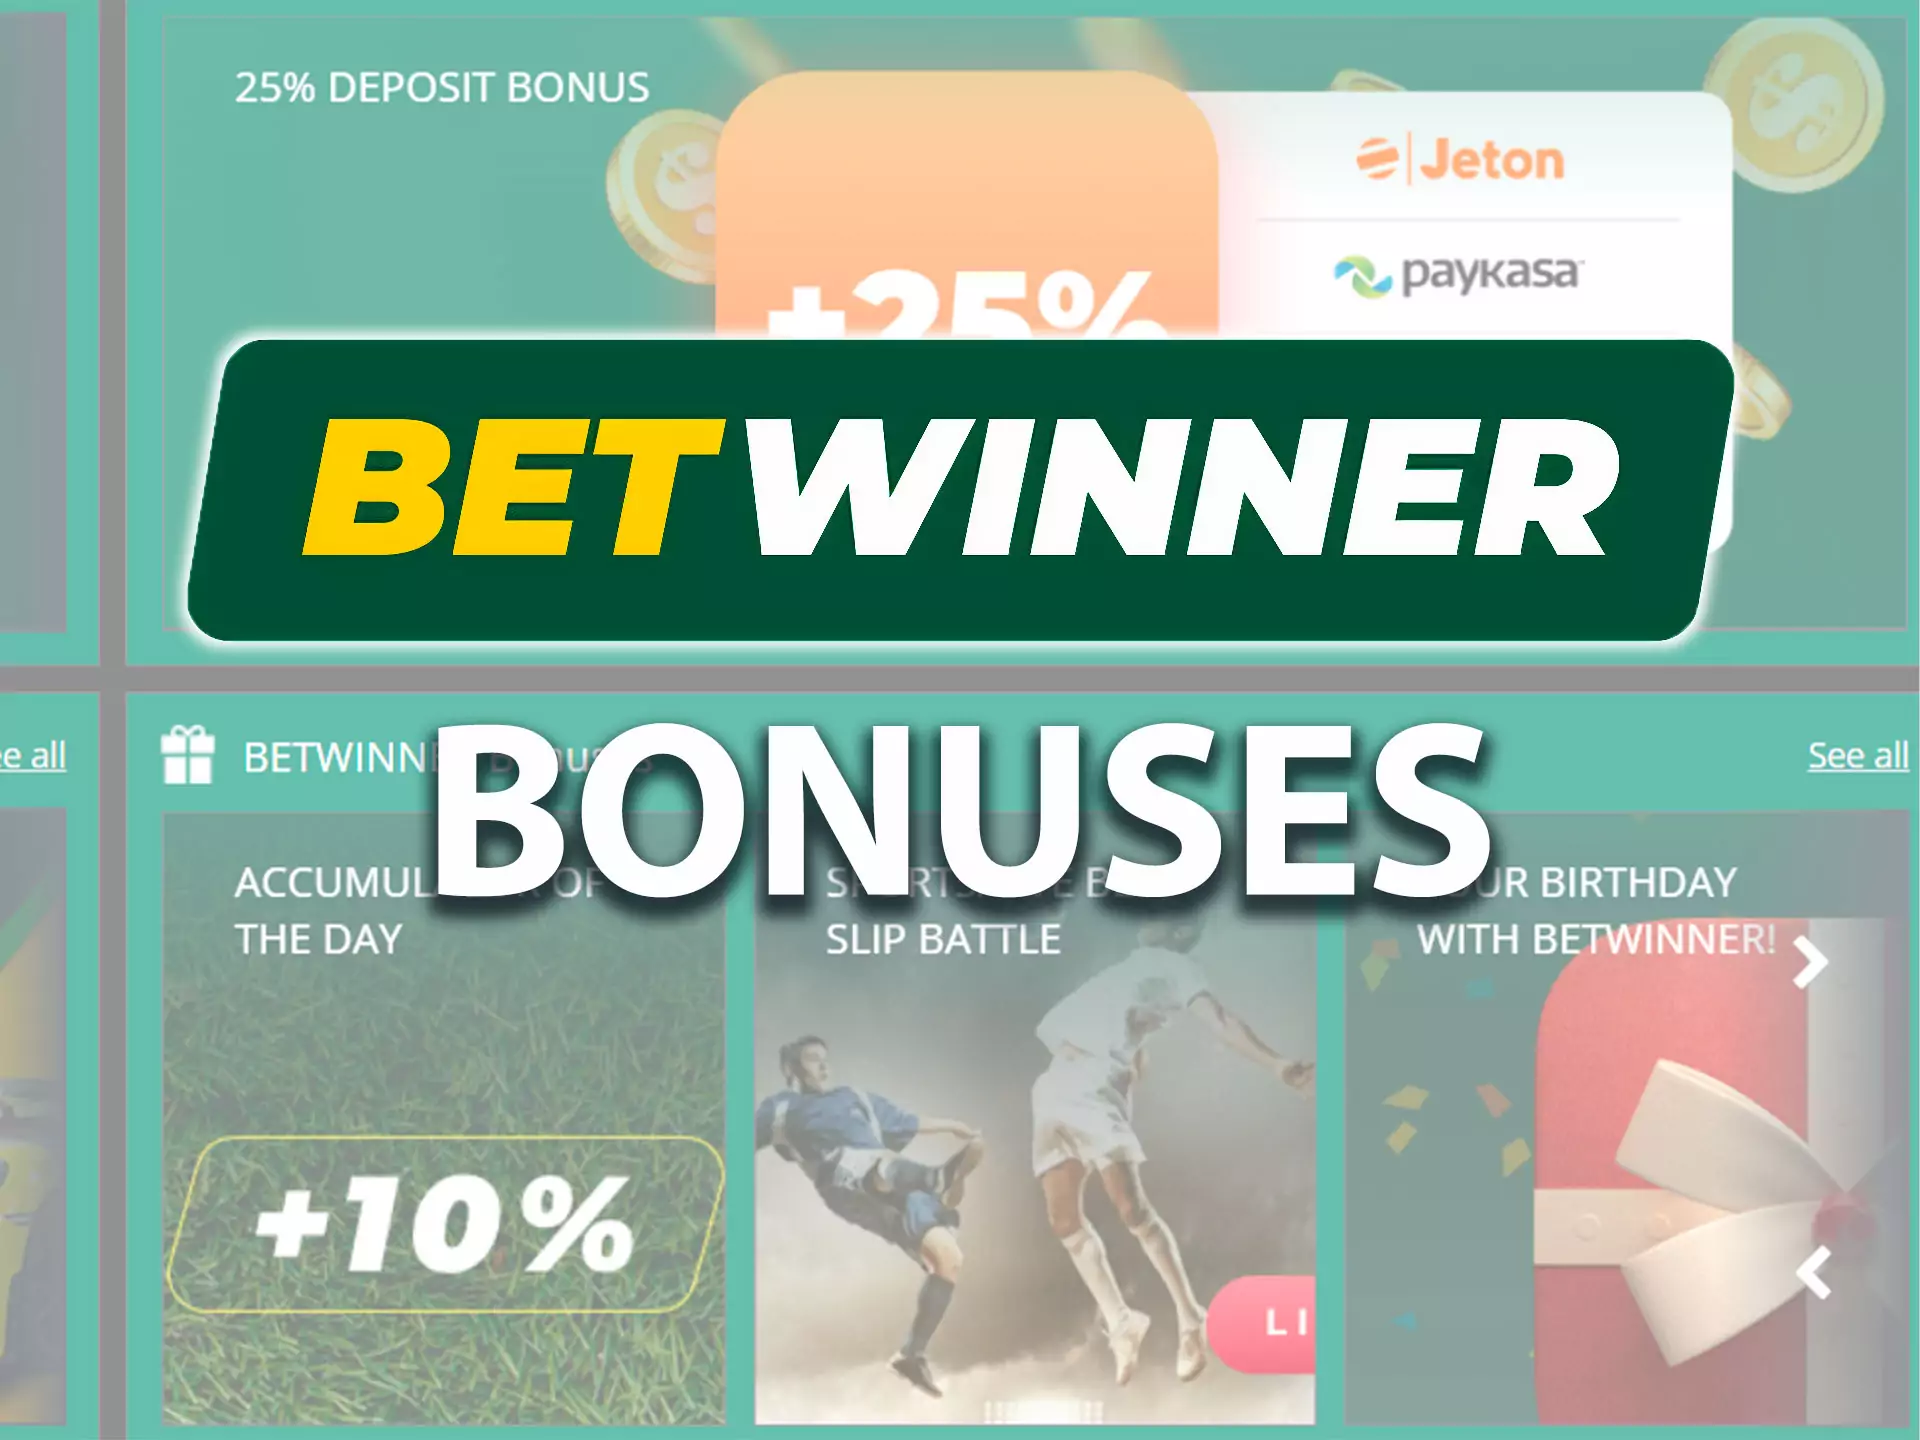 Learn more about Betwinner bonuses on the 'PROMO' page.